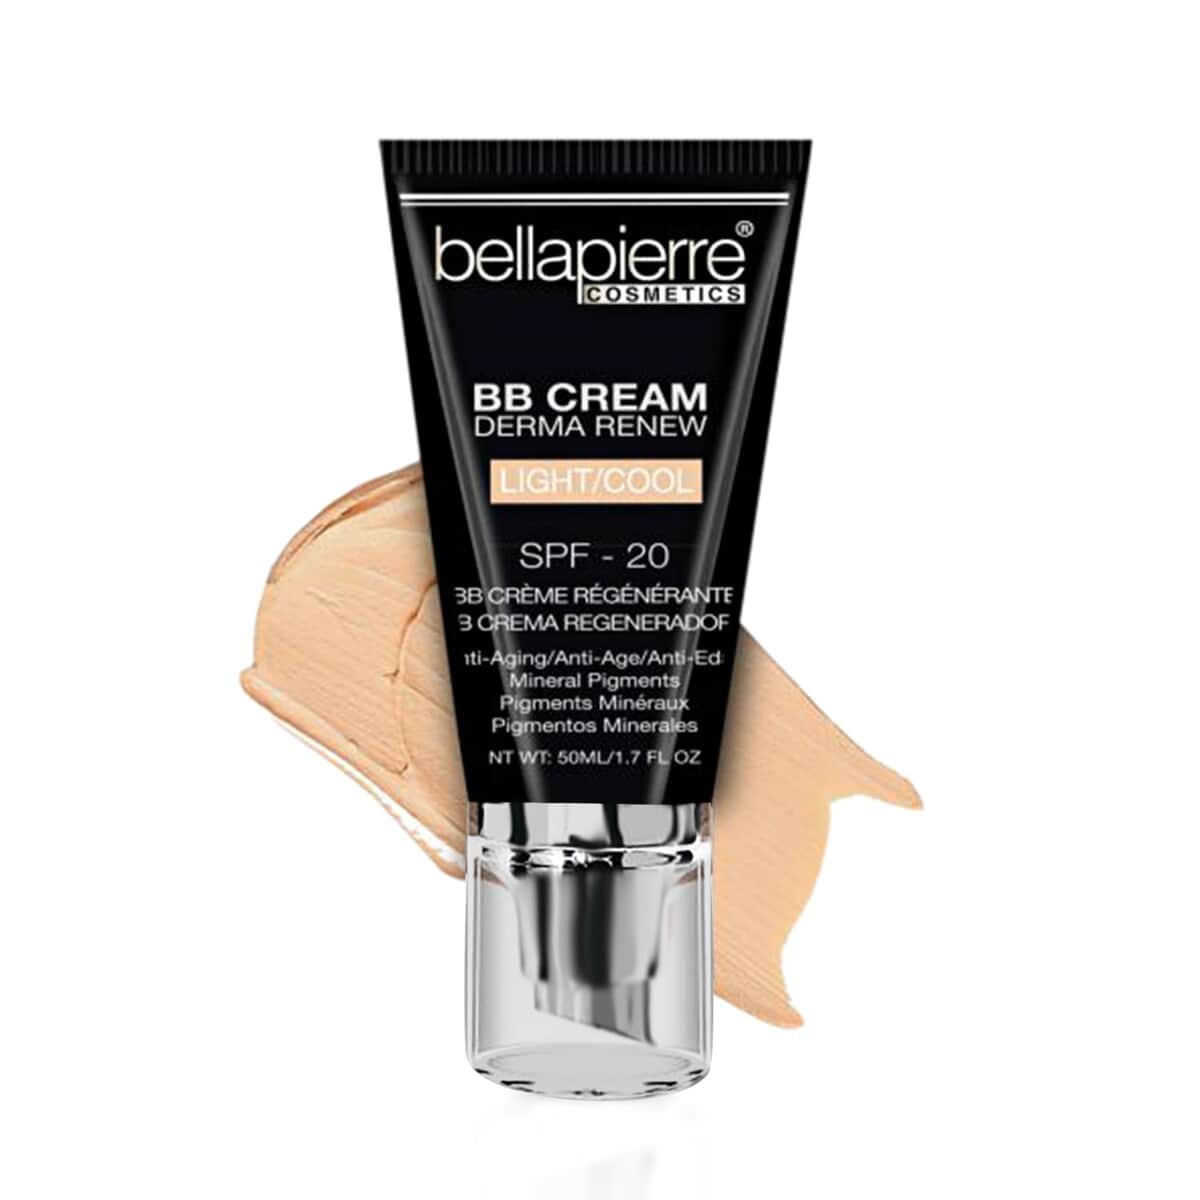 Bellapierre Cosmetics BB Cream - Light Cool (1.7 oz) (Ships in 8-10 Business Days) image number 0